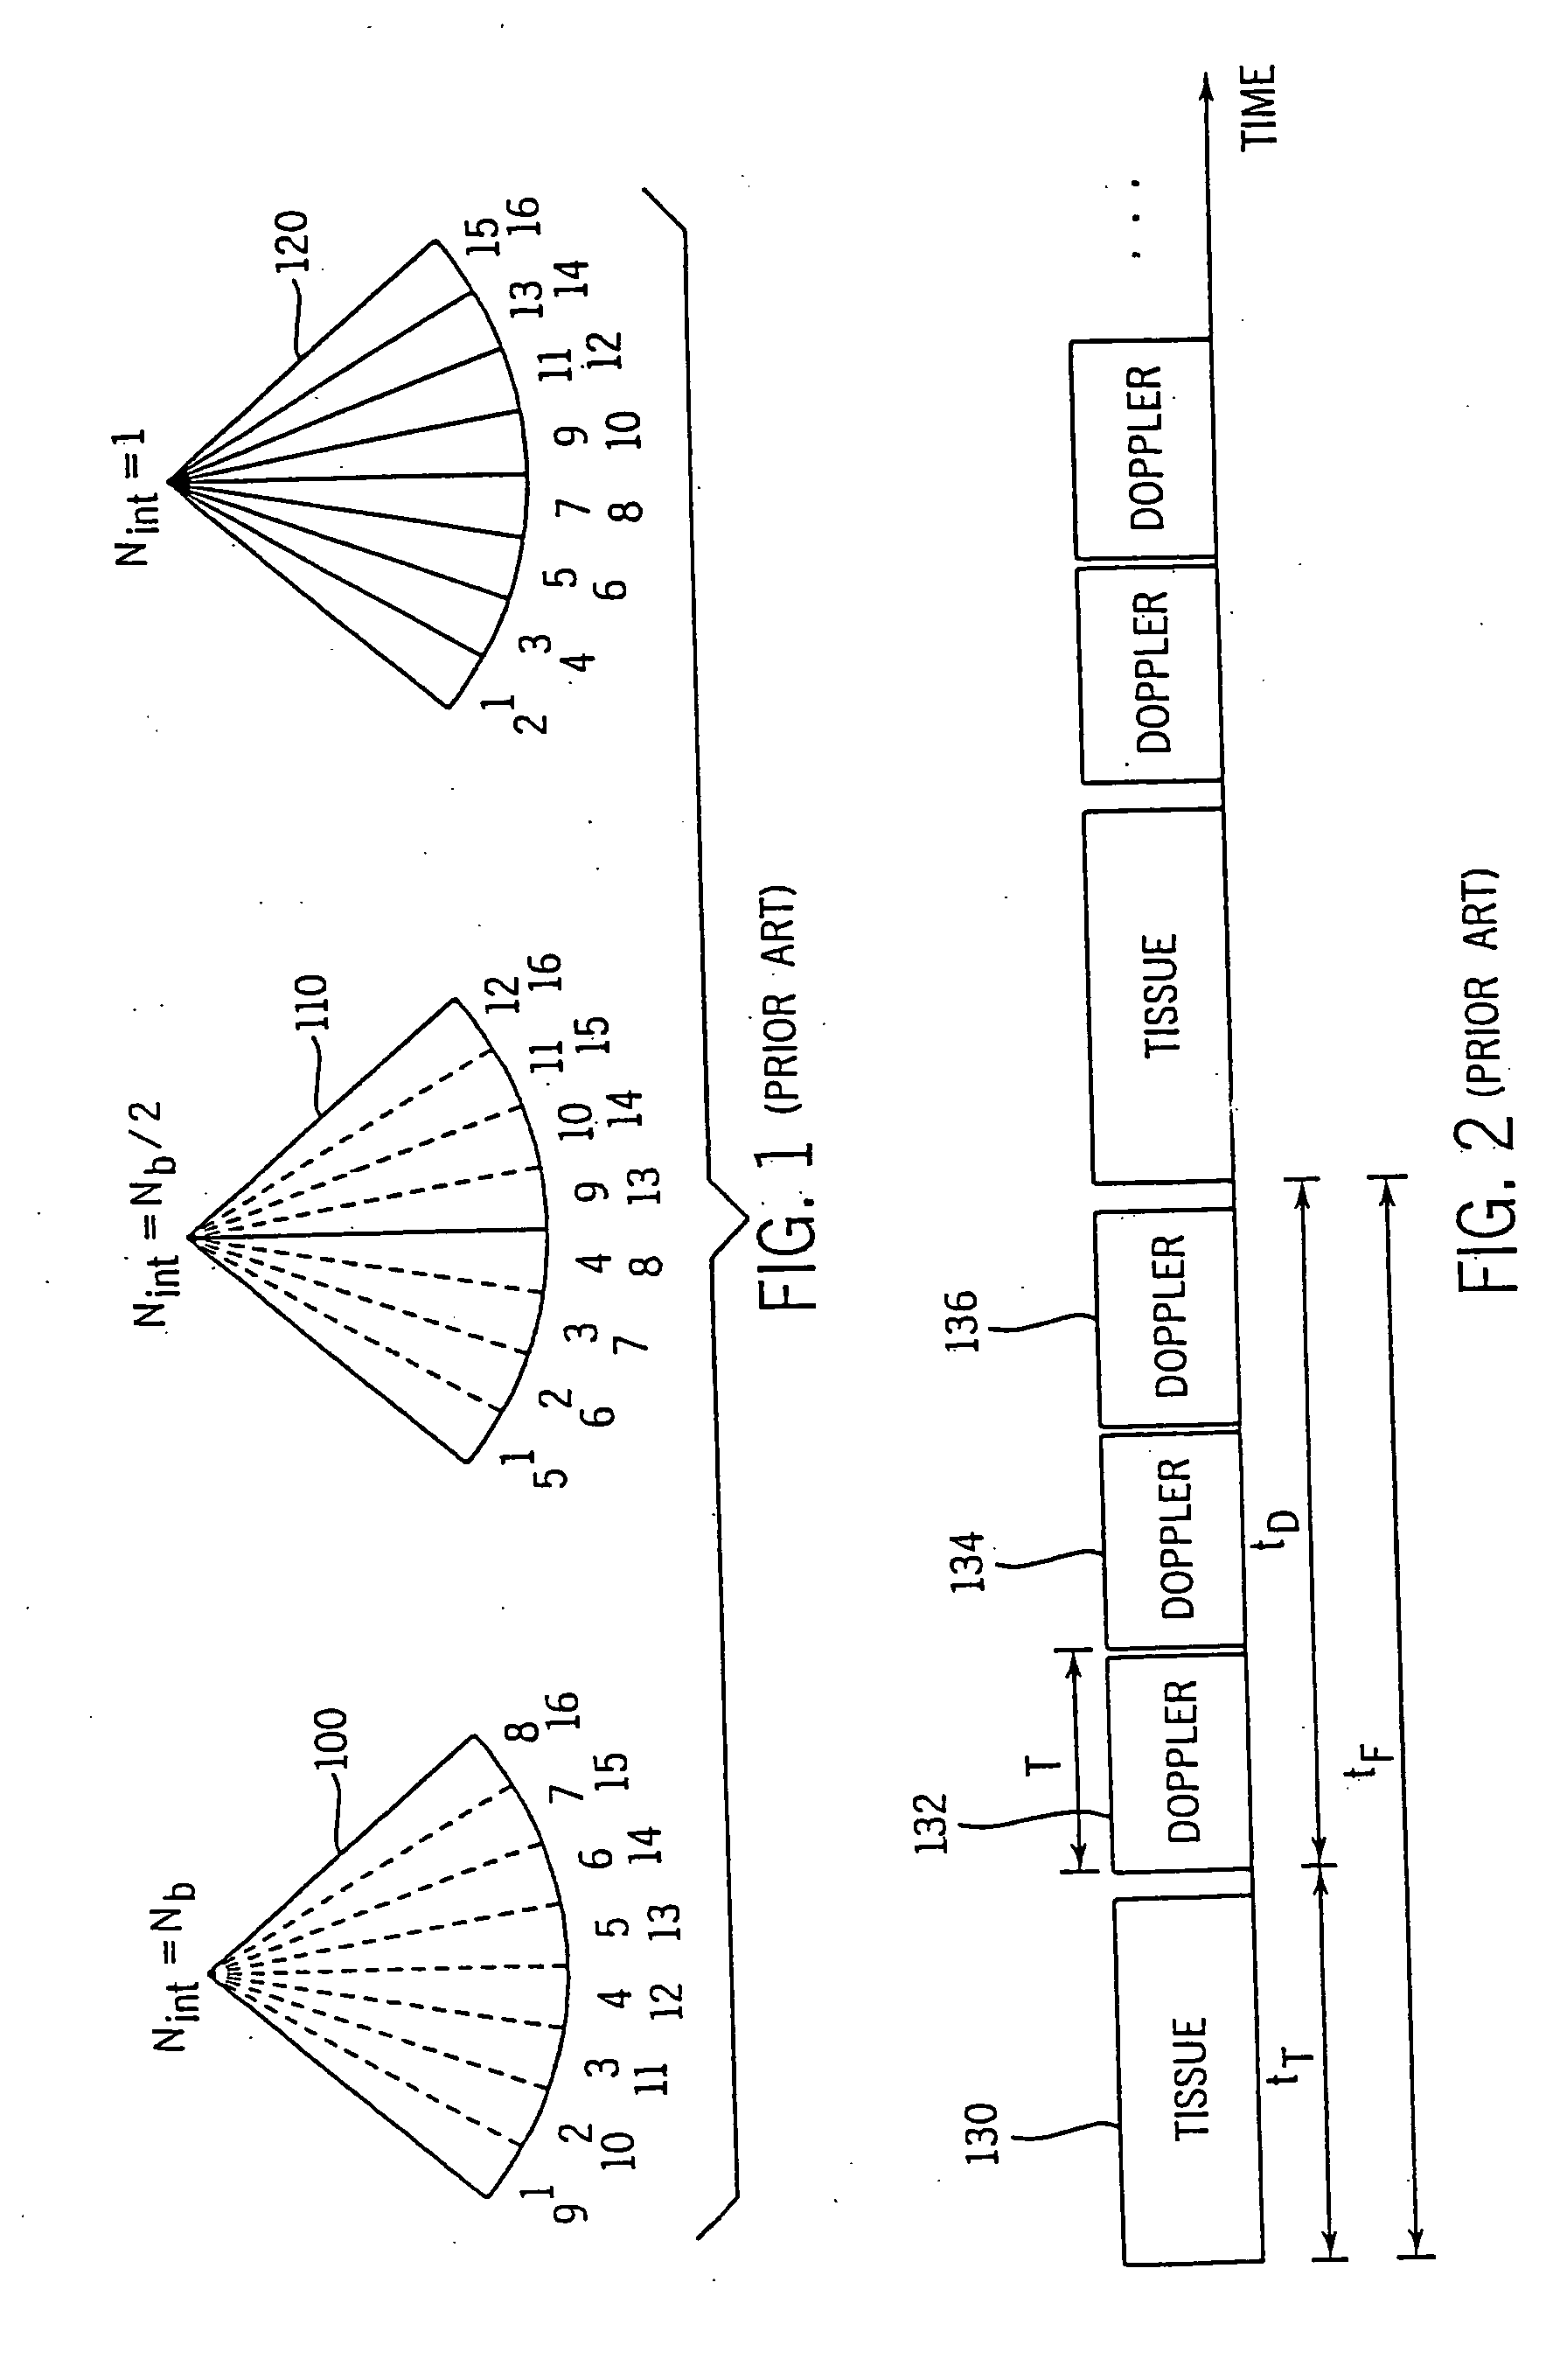 Method and apparatus for providing real-time calculation and display of tissue deformation in ultrasound imaging